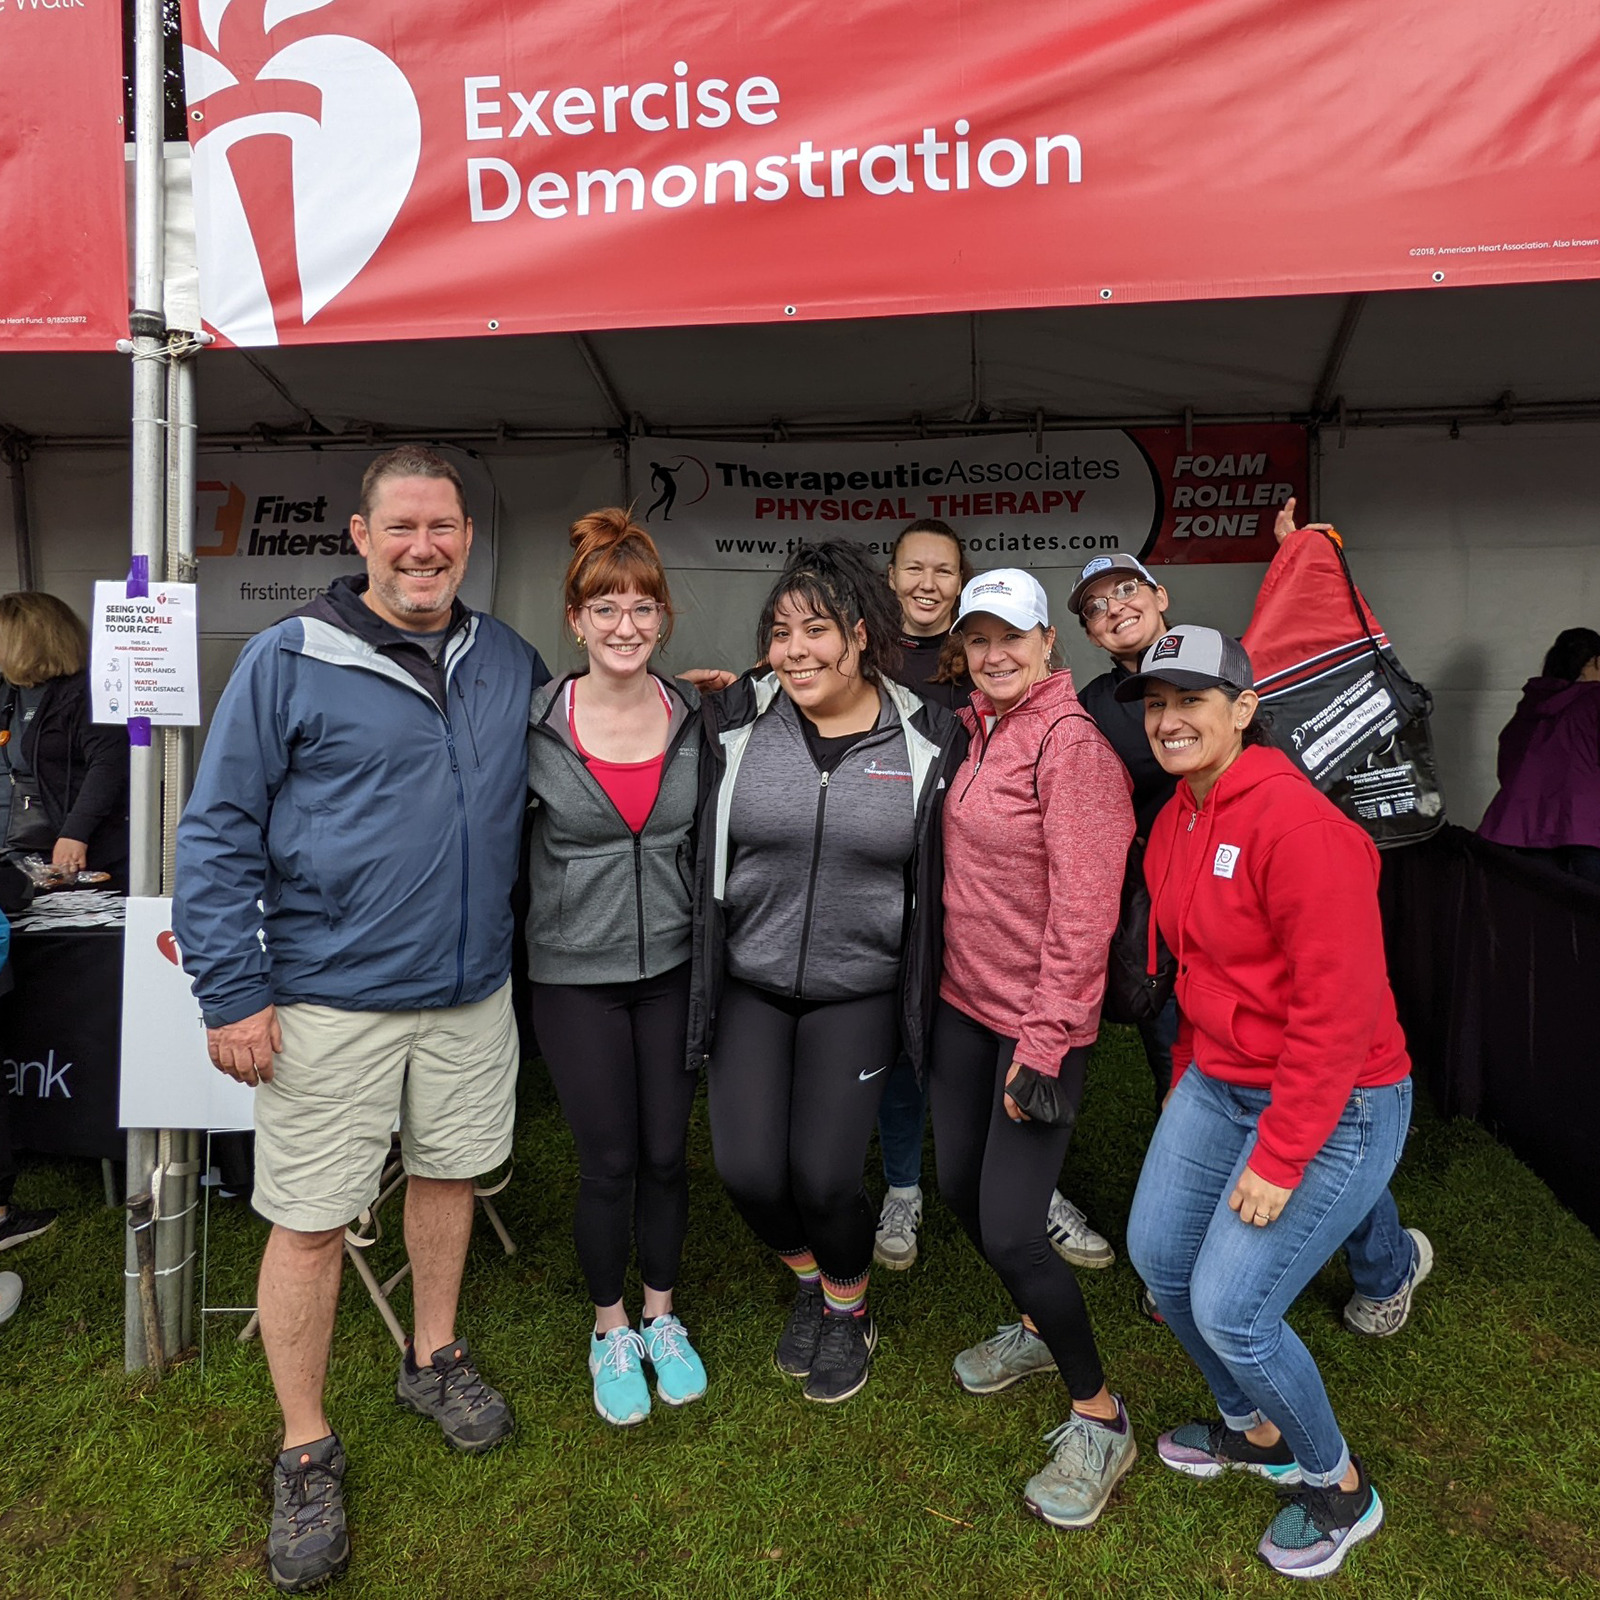 Therapeutic Associates Physical Therapy - American Heart Association - Portland Heart Walk